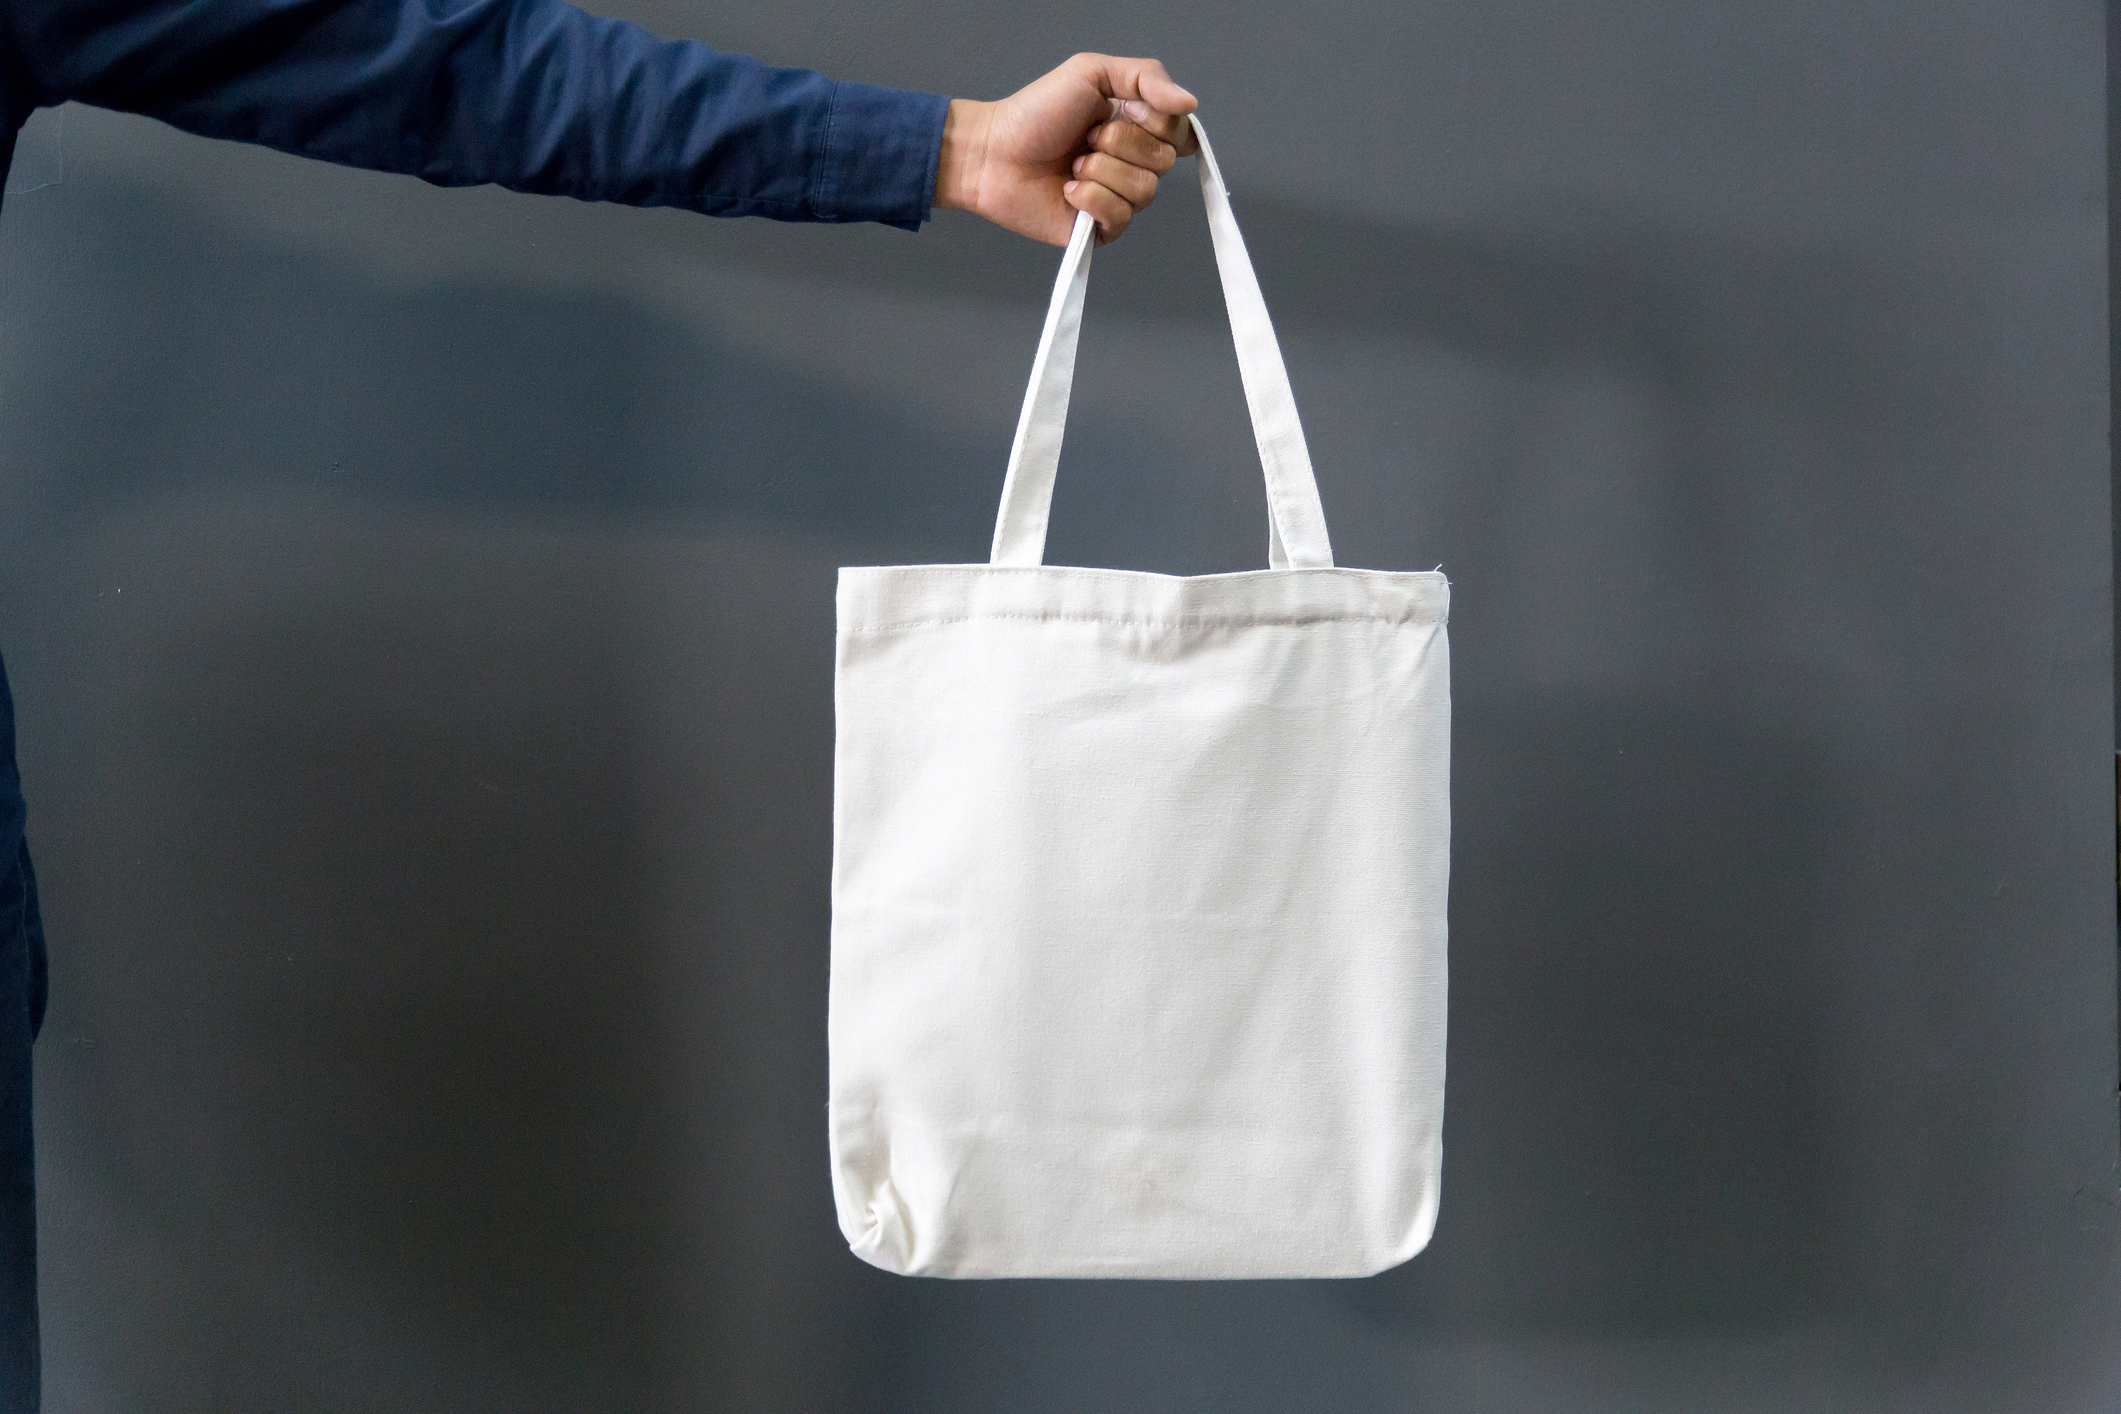 A person’s hand holding a blank fabric tote bag.